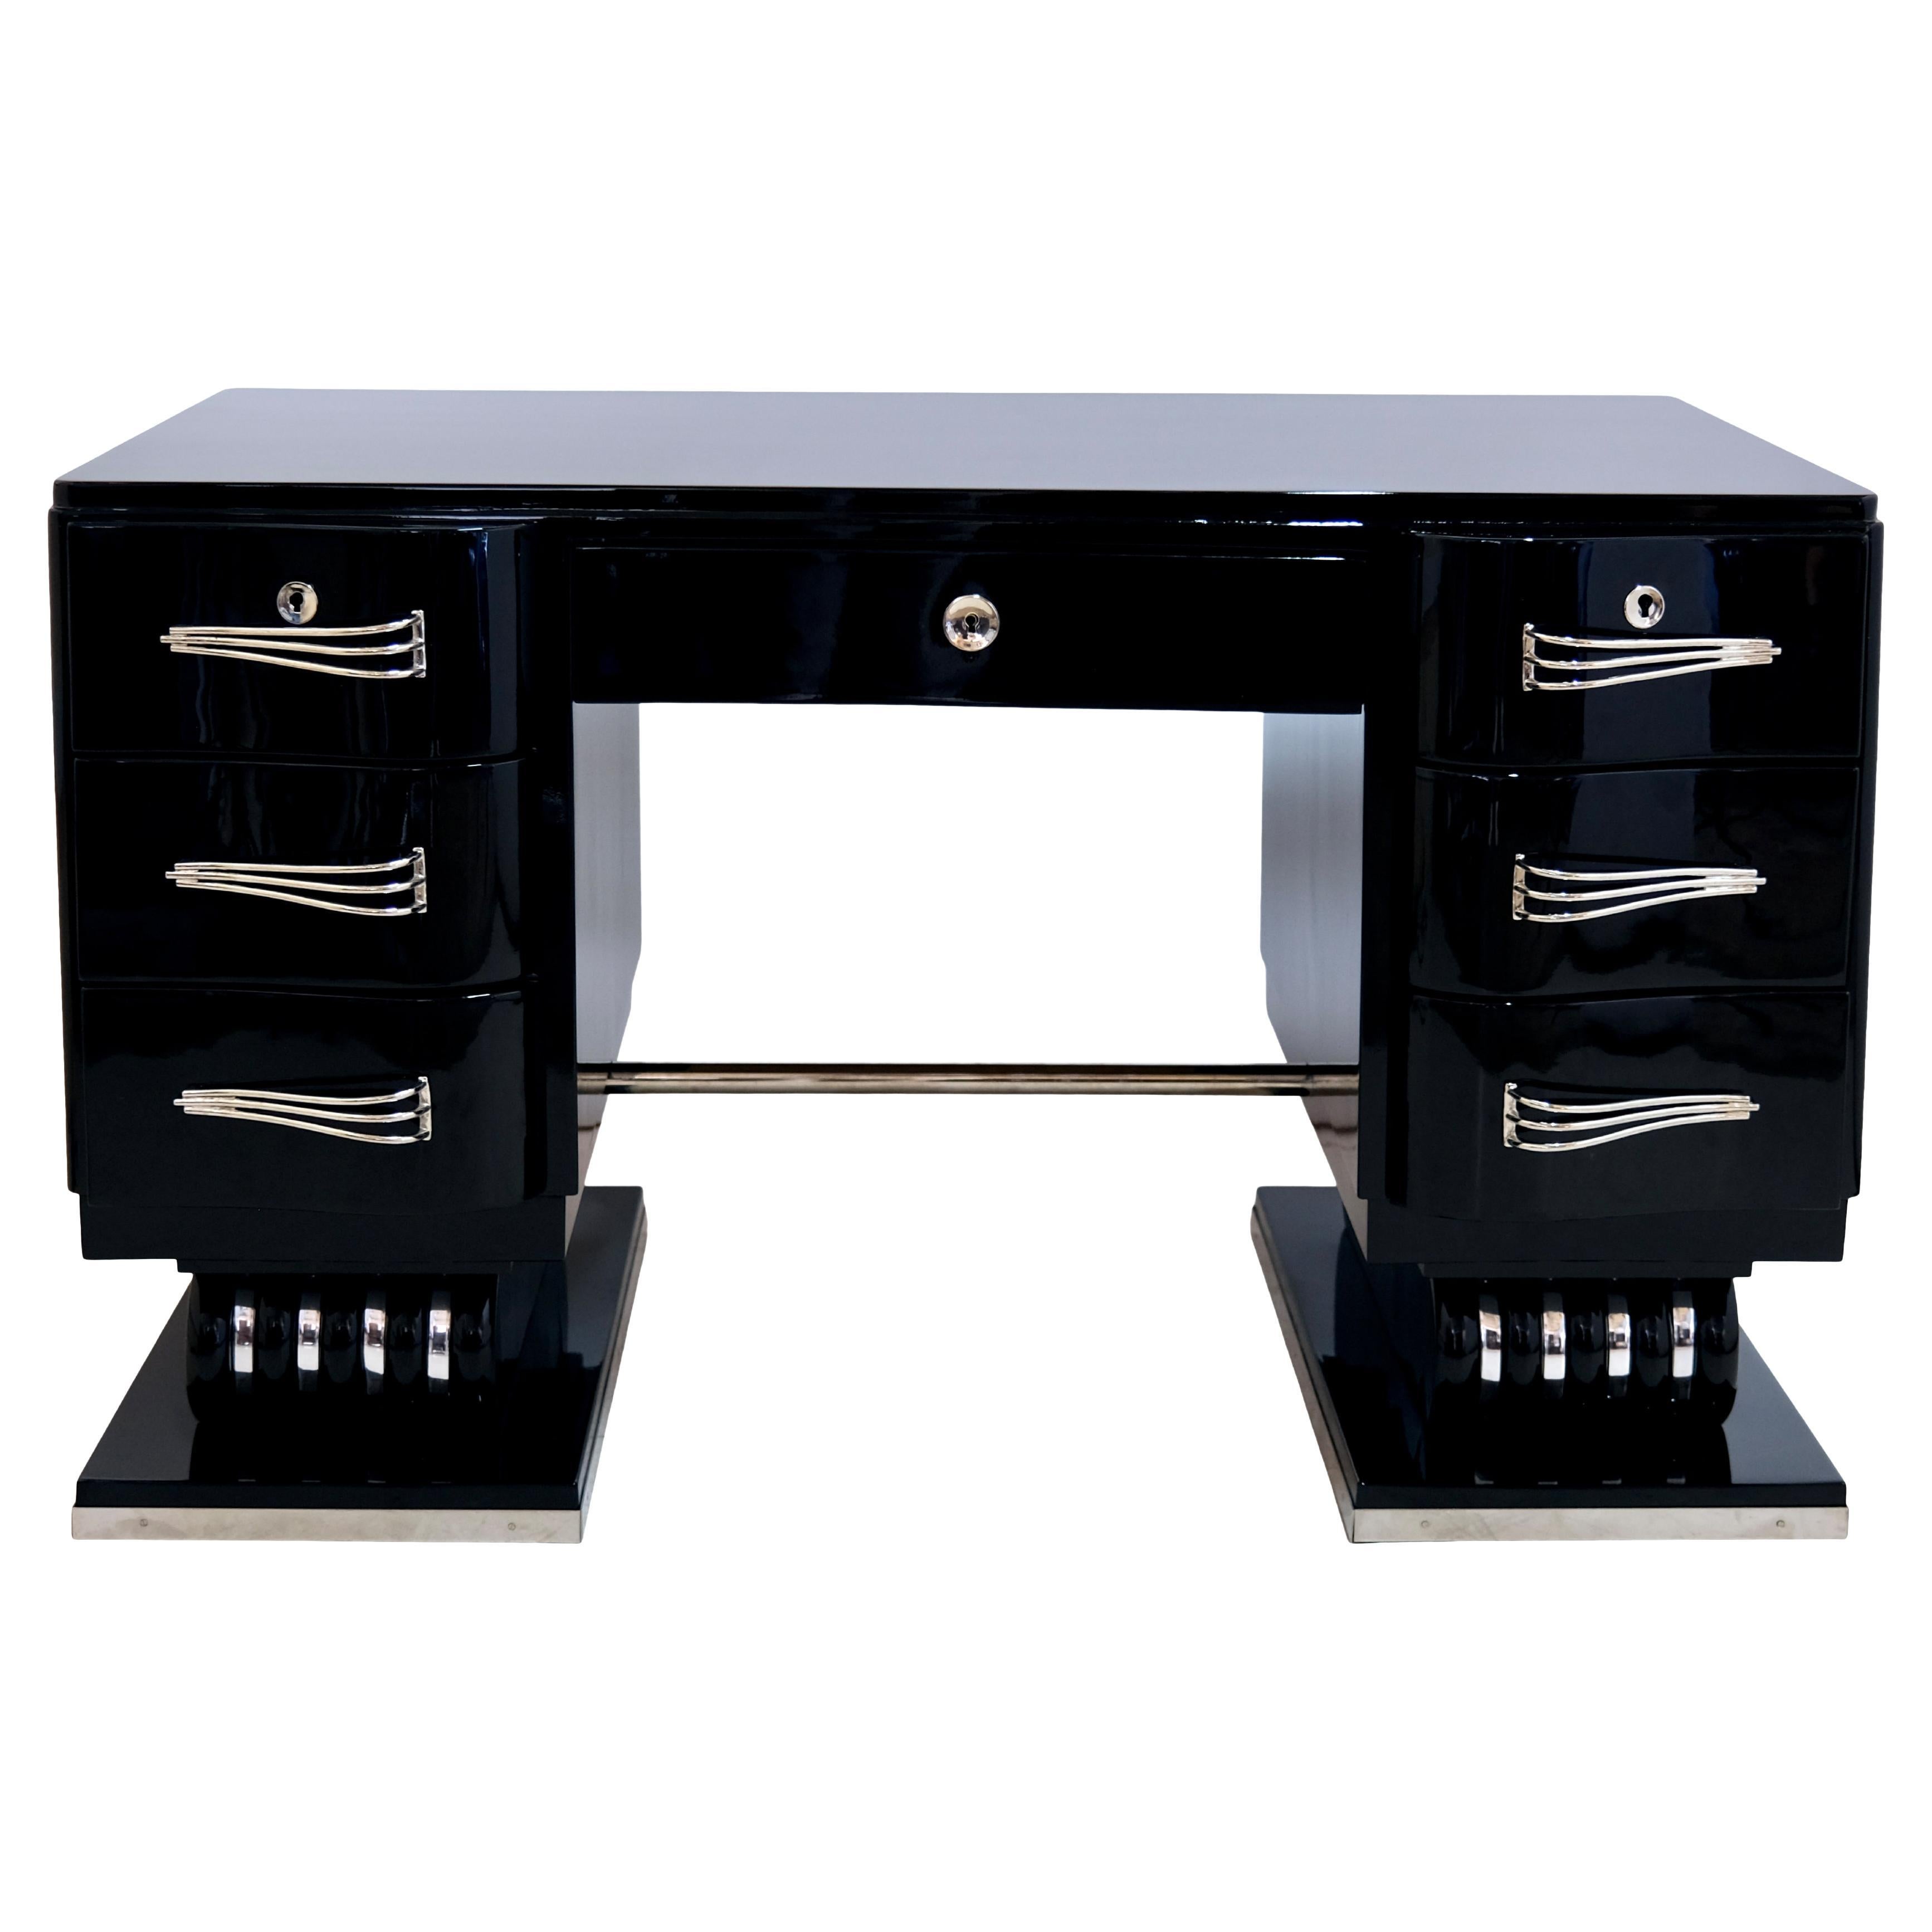 1930s French Art Deco Desk in Black Lacquer with Nickeled Metal Applications For Sale